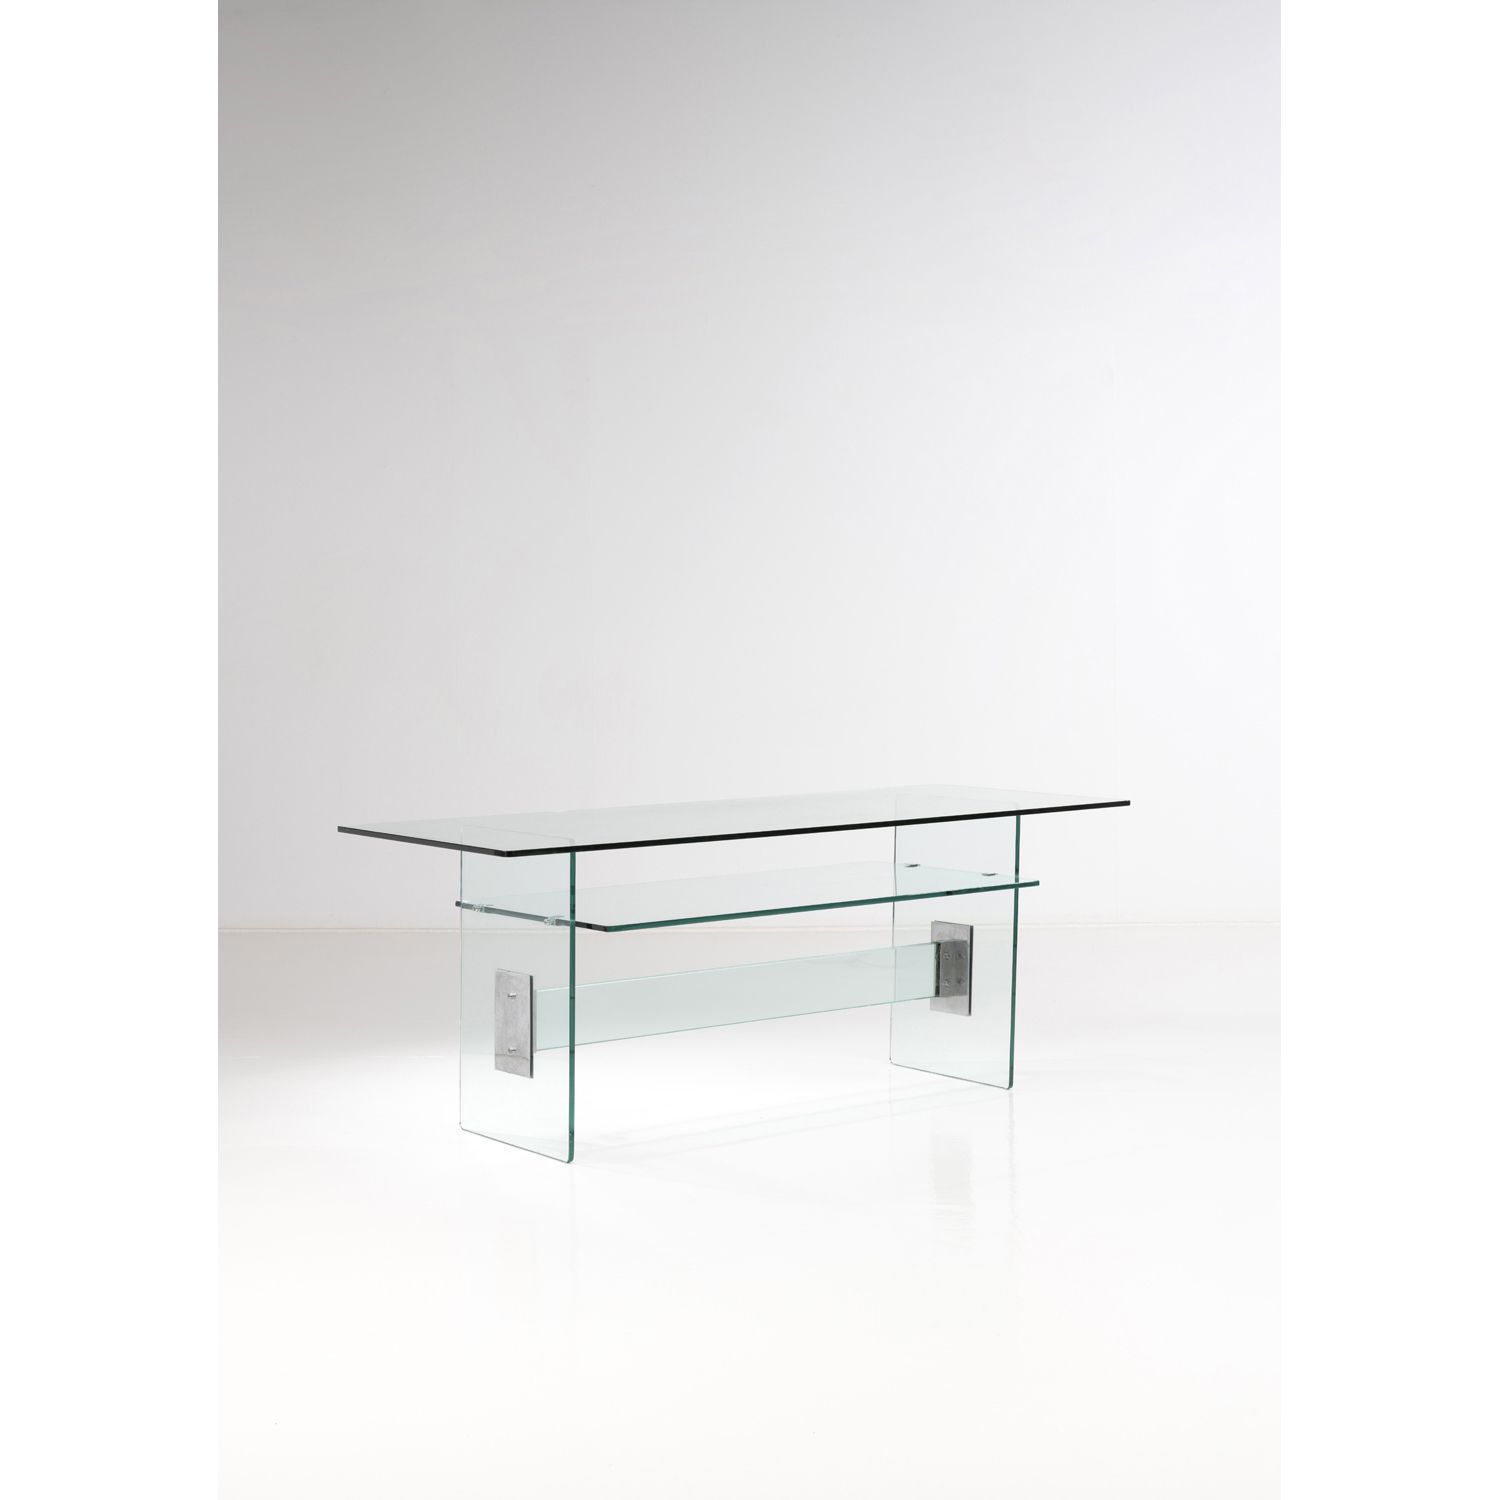 Null Fontana Arte (20th c.), attributed to

Table

Glass and chromed metal

Mode&hellip;